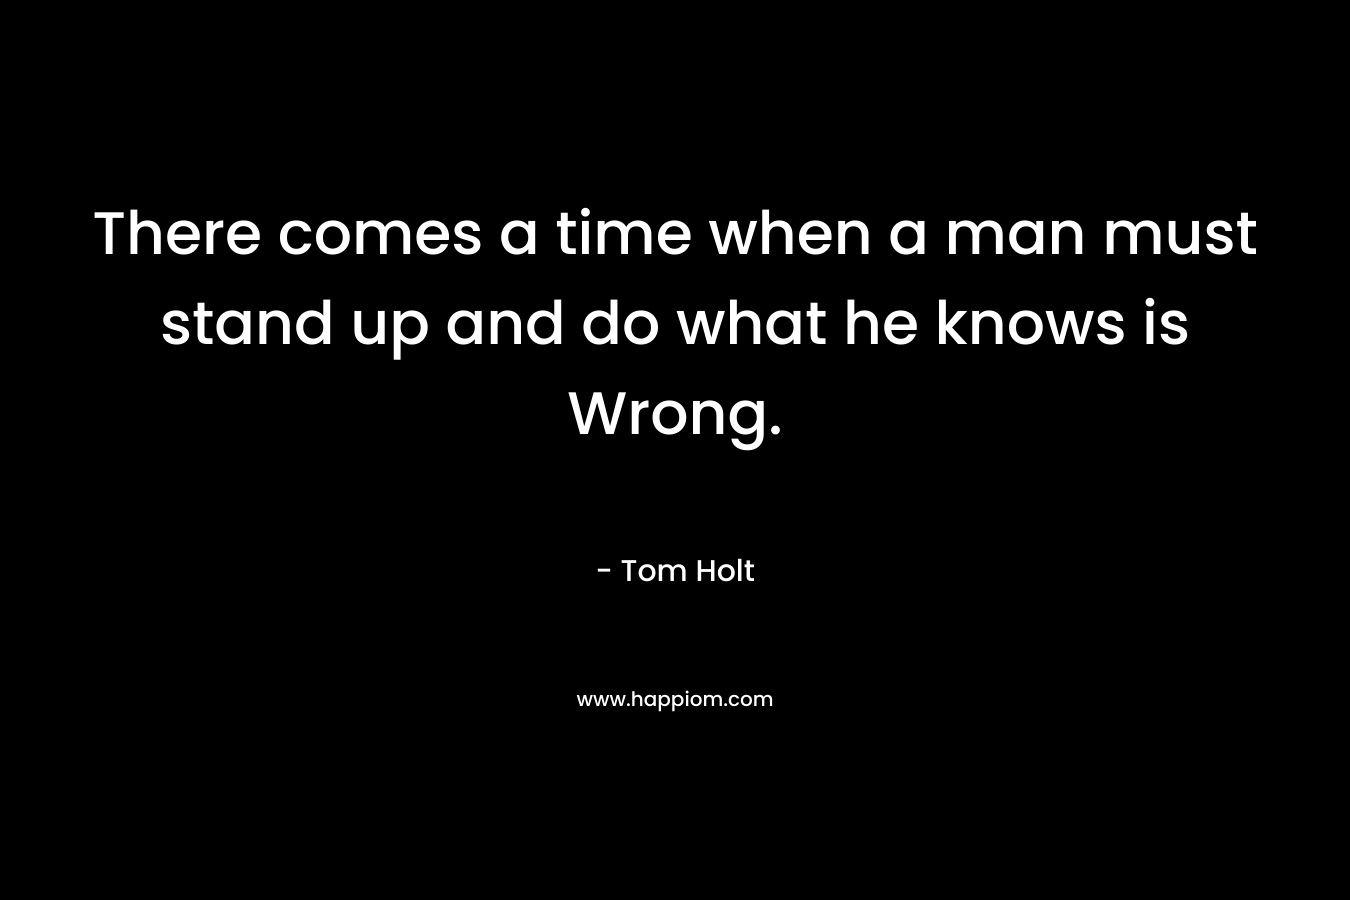 There comes a time when a man must stand up and do what he knows is Wrong. – Tom Holt